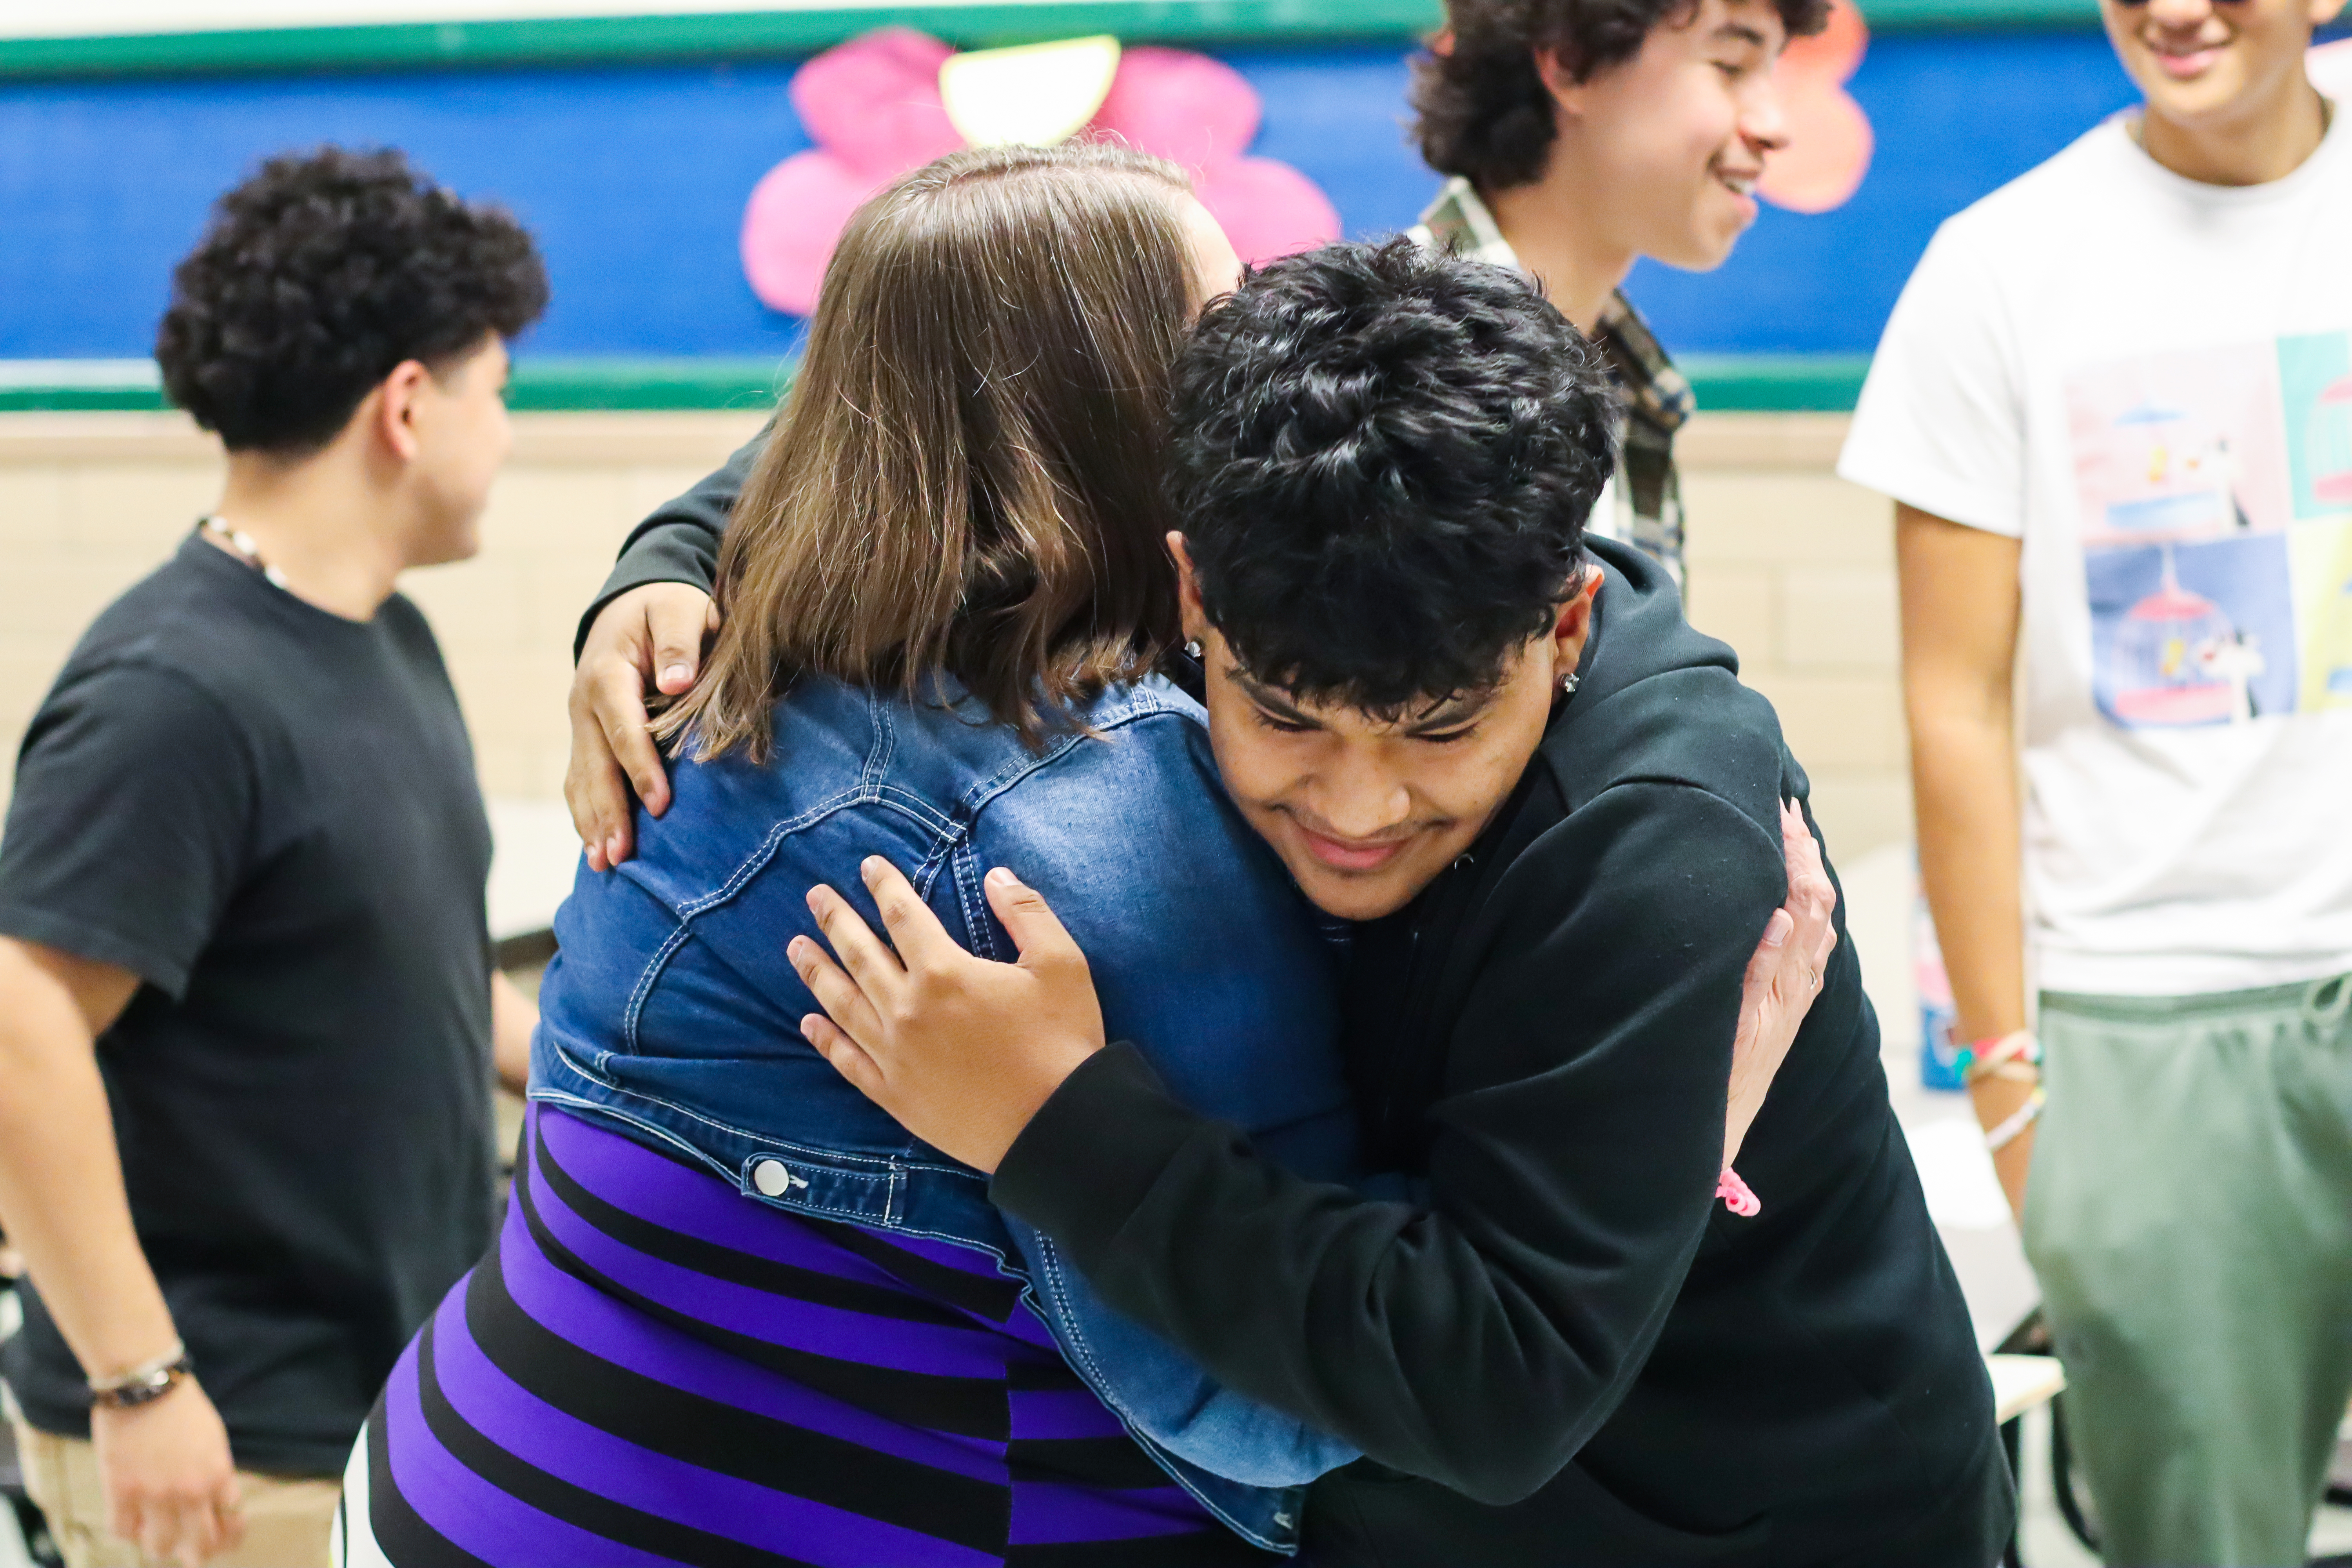 A former Lynbrook Elementary student, now a Lewis High School grad, hugs their one-time sixth grade teacher Wendy Casual.